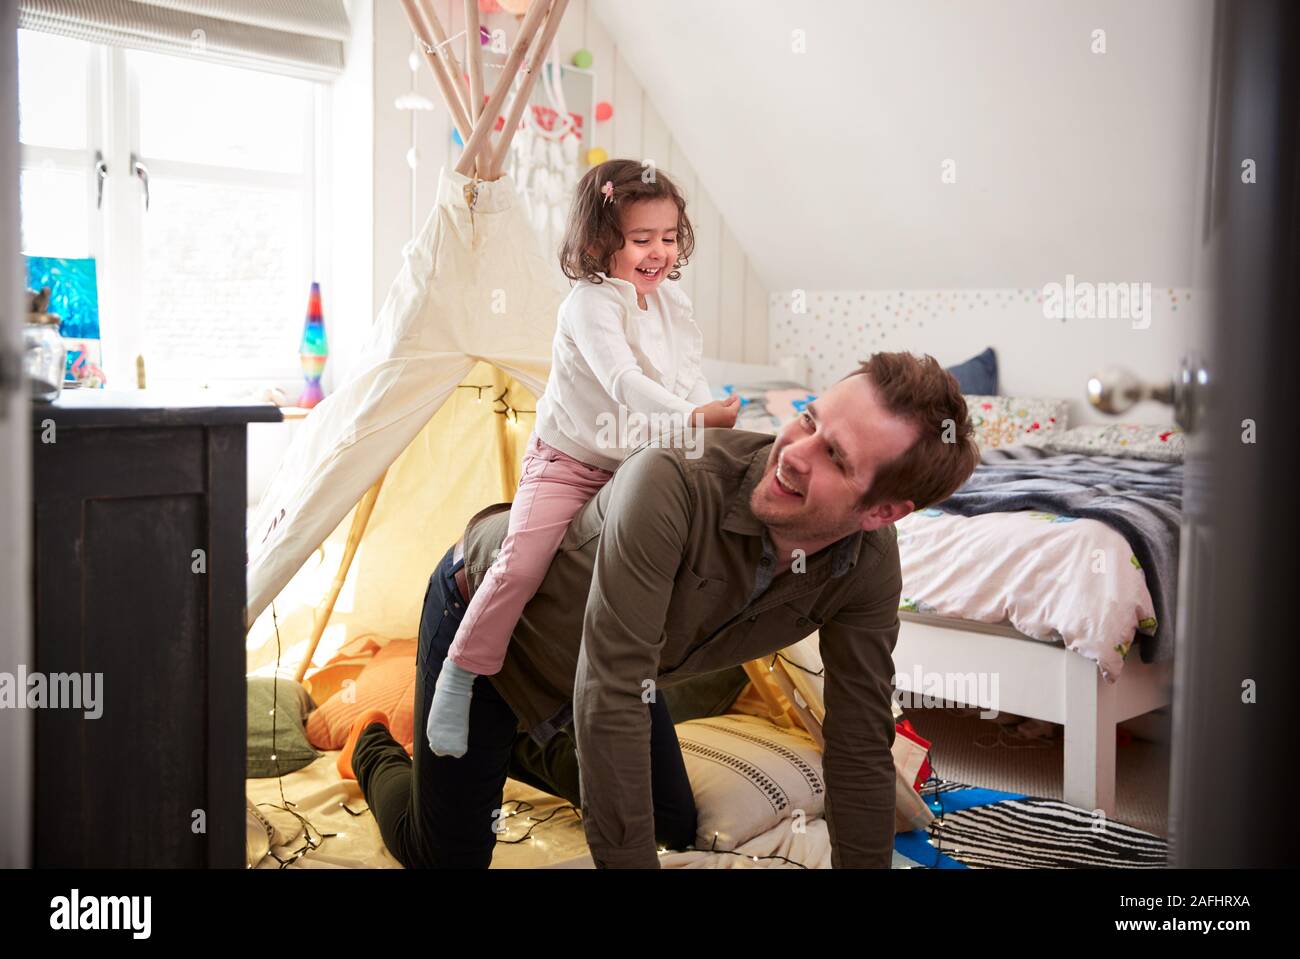 Daughter Riding On Fathers Back As They Play In Den In Bedroom At Home Stock Photo